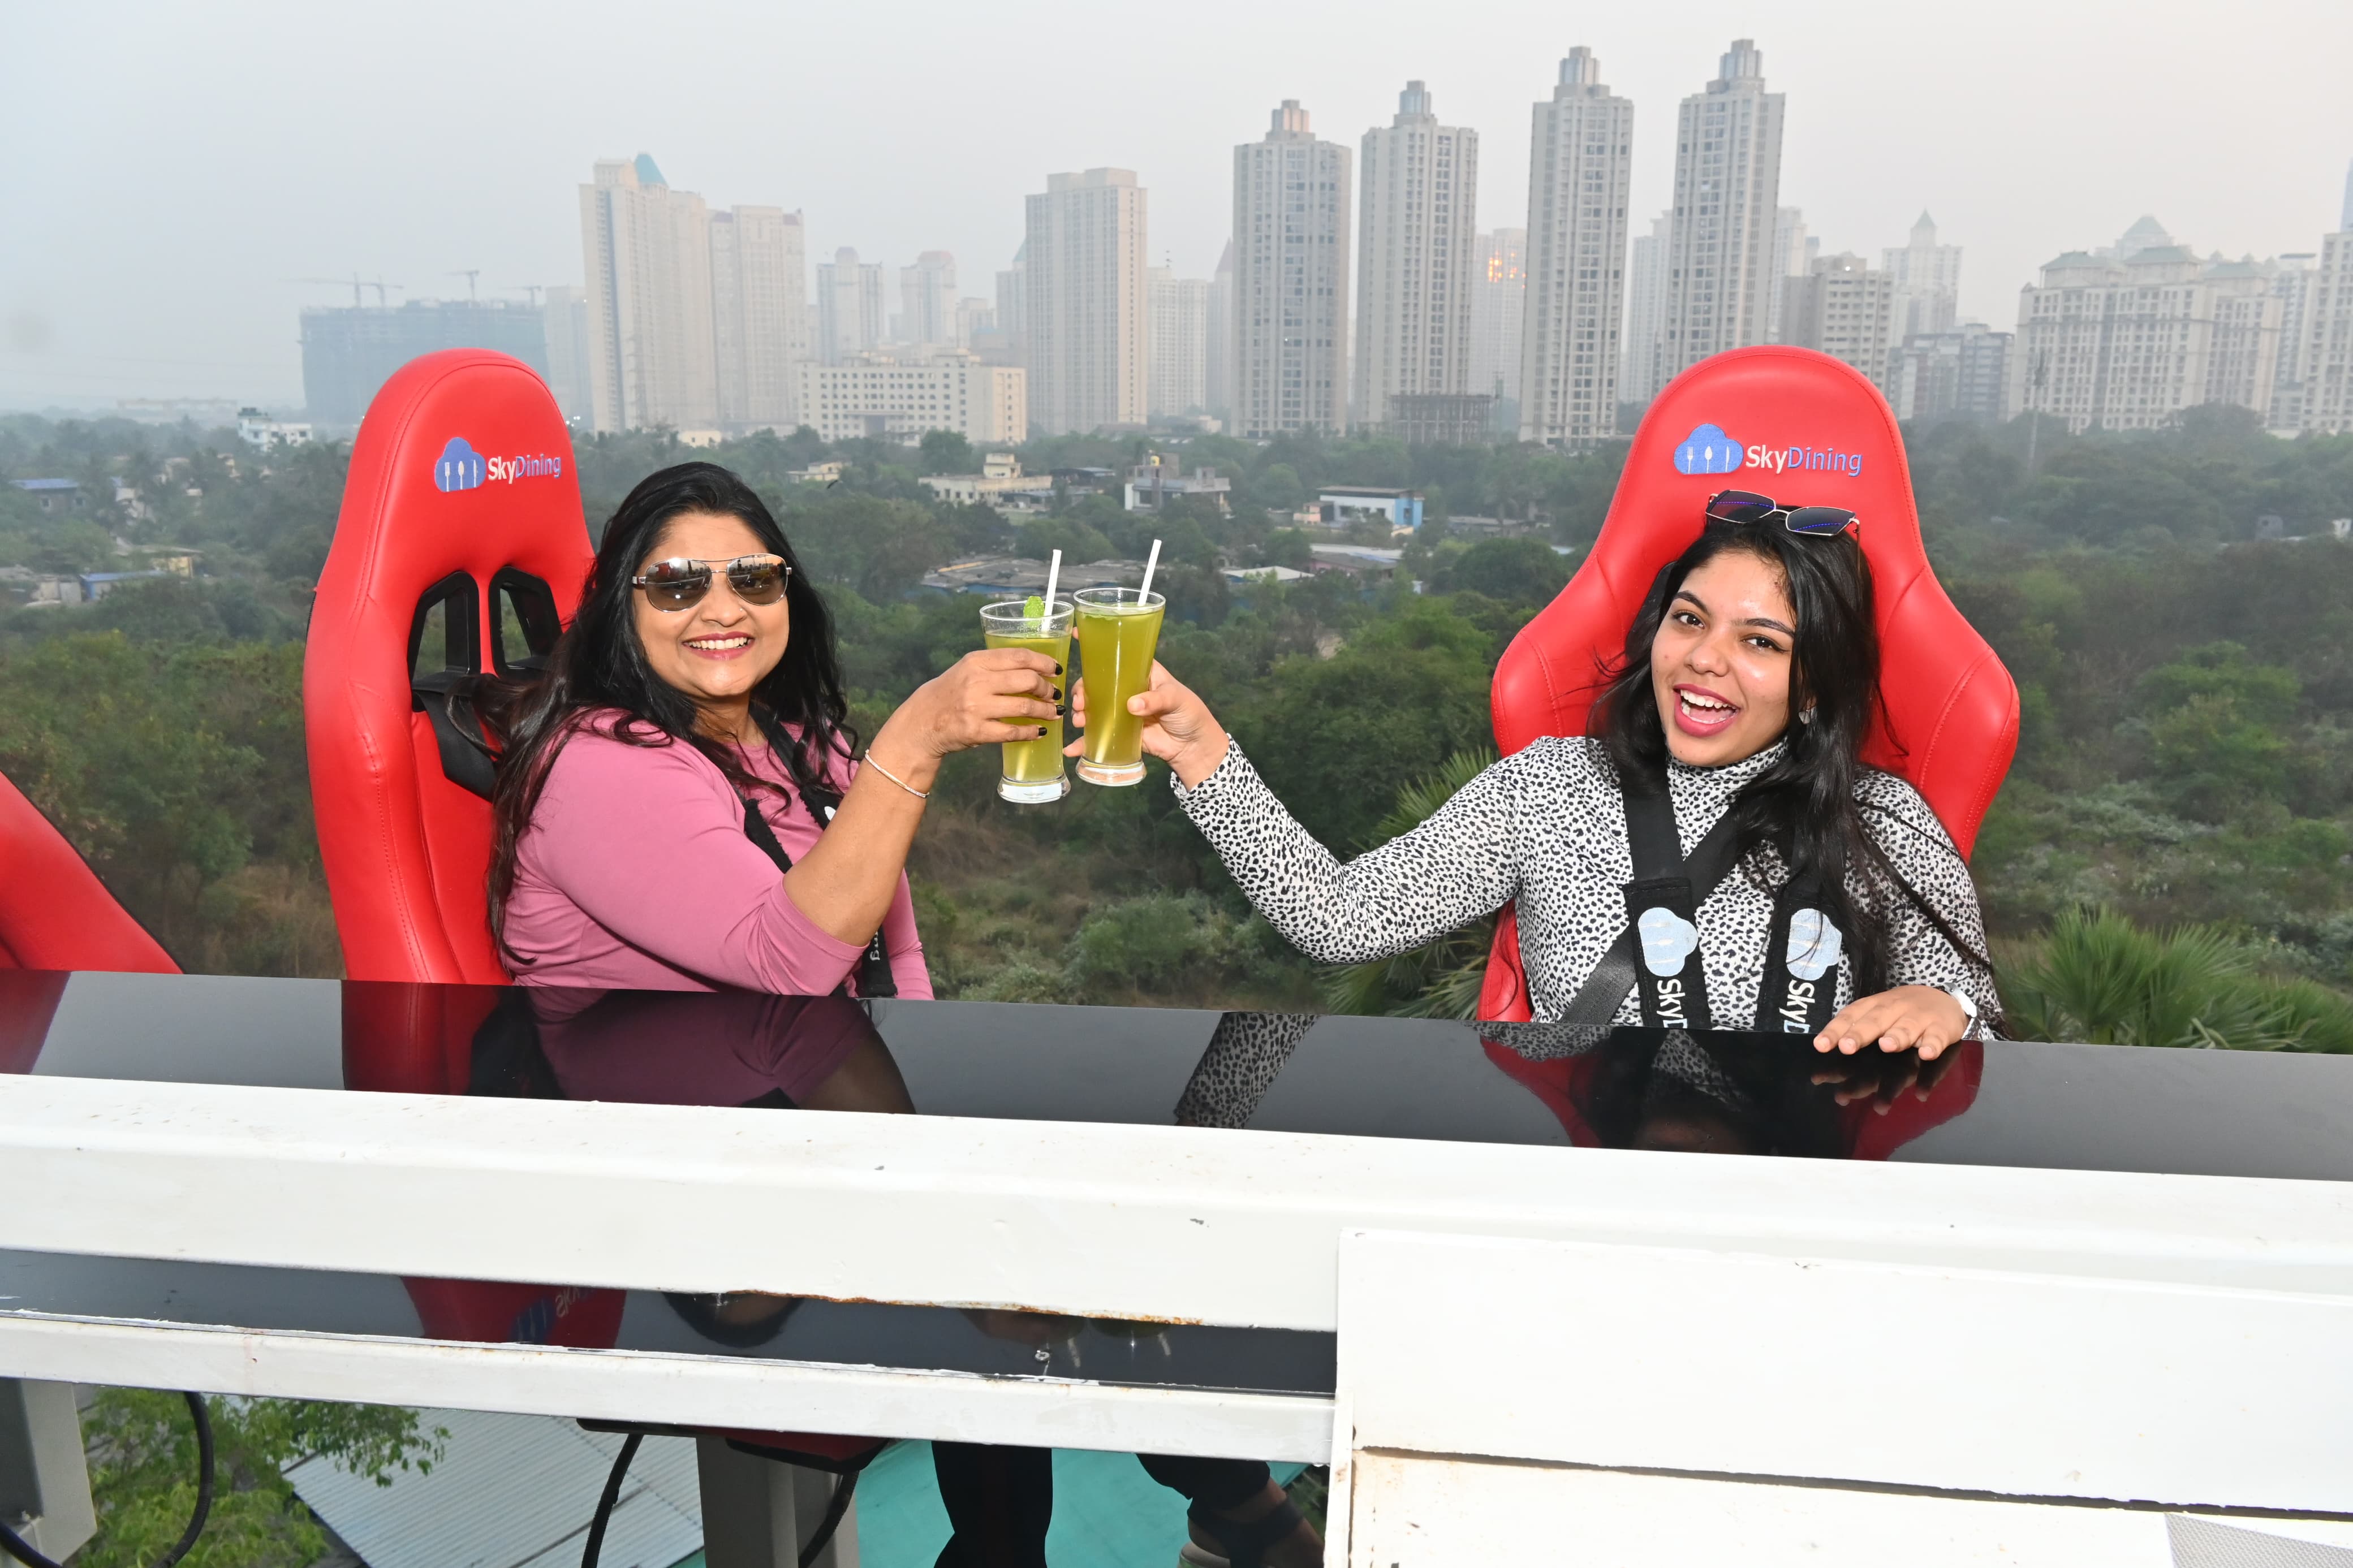 "Dining Above the Clouds: Influencers' Rave Reviews of Sky Dining Mumbai's Culinary Soar. Fully sold out for New Year's Celebrations"